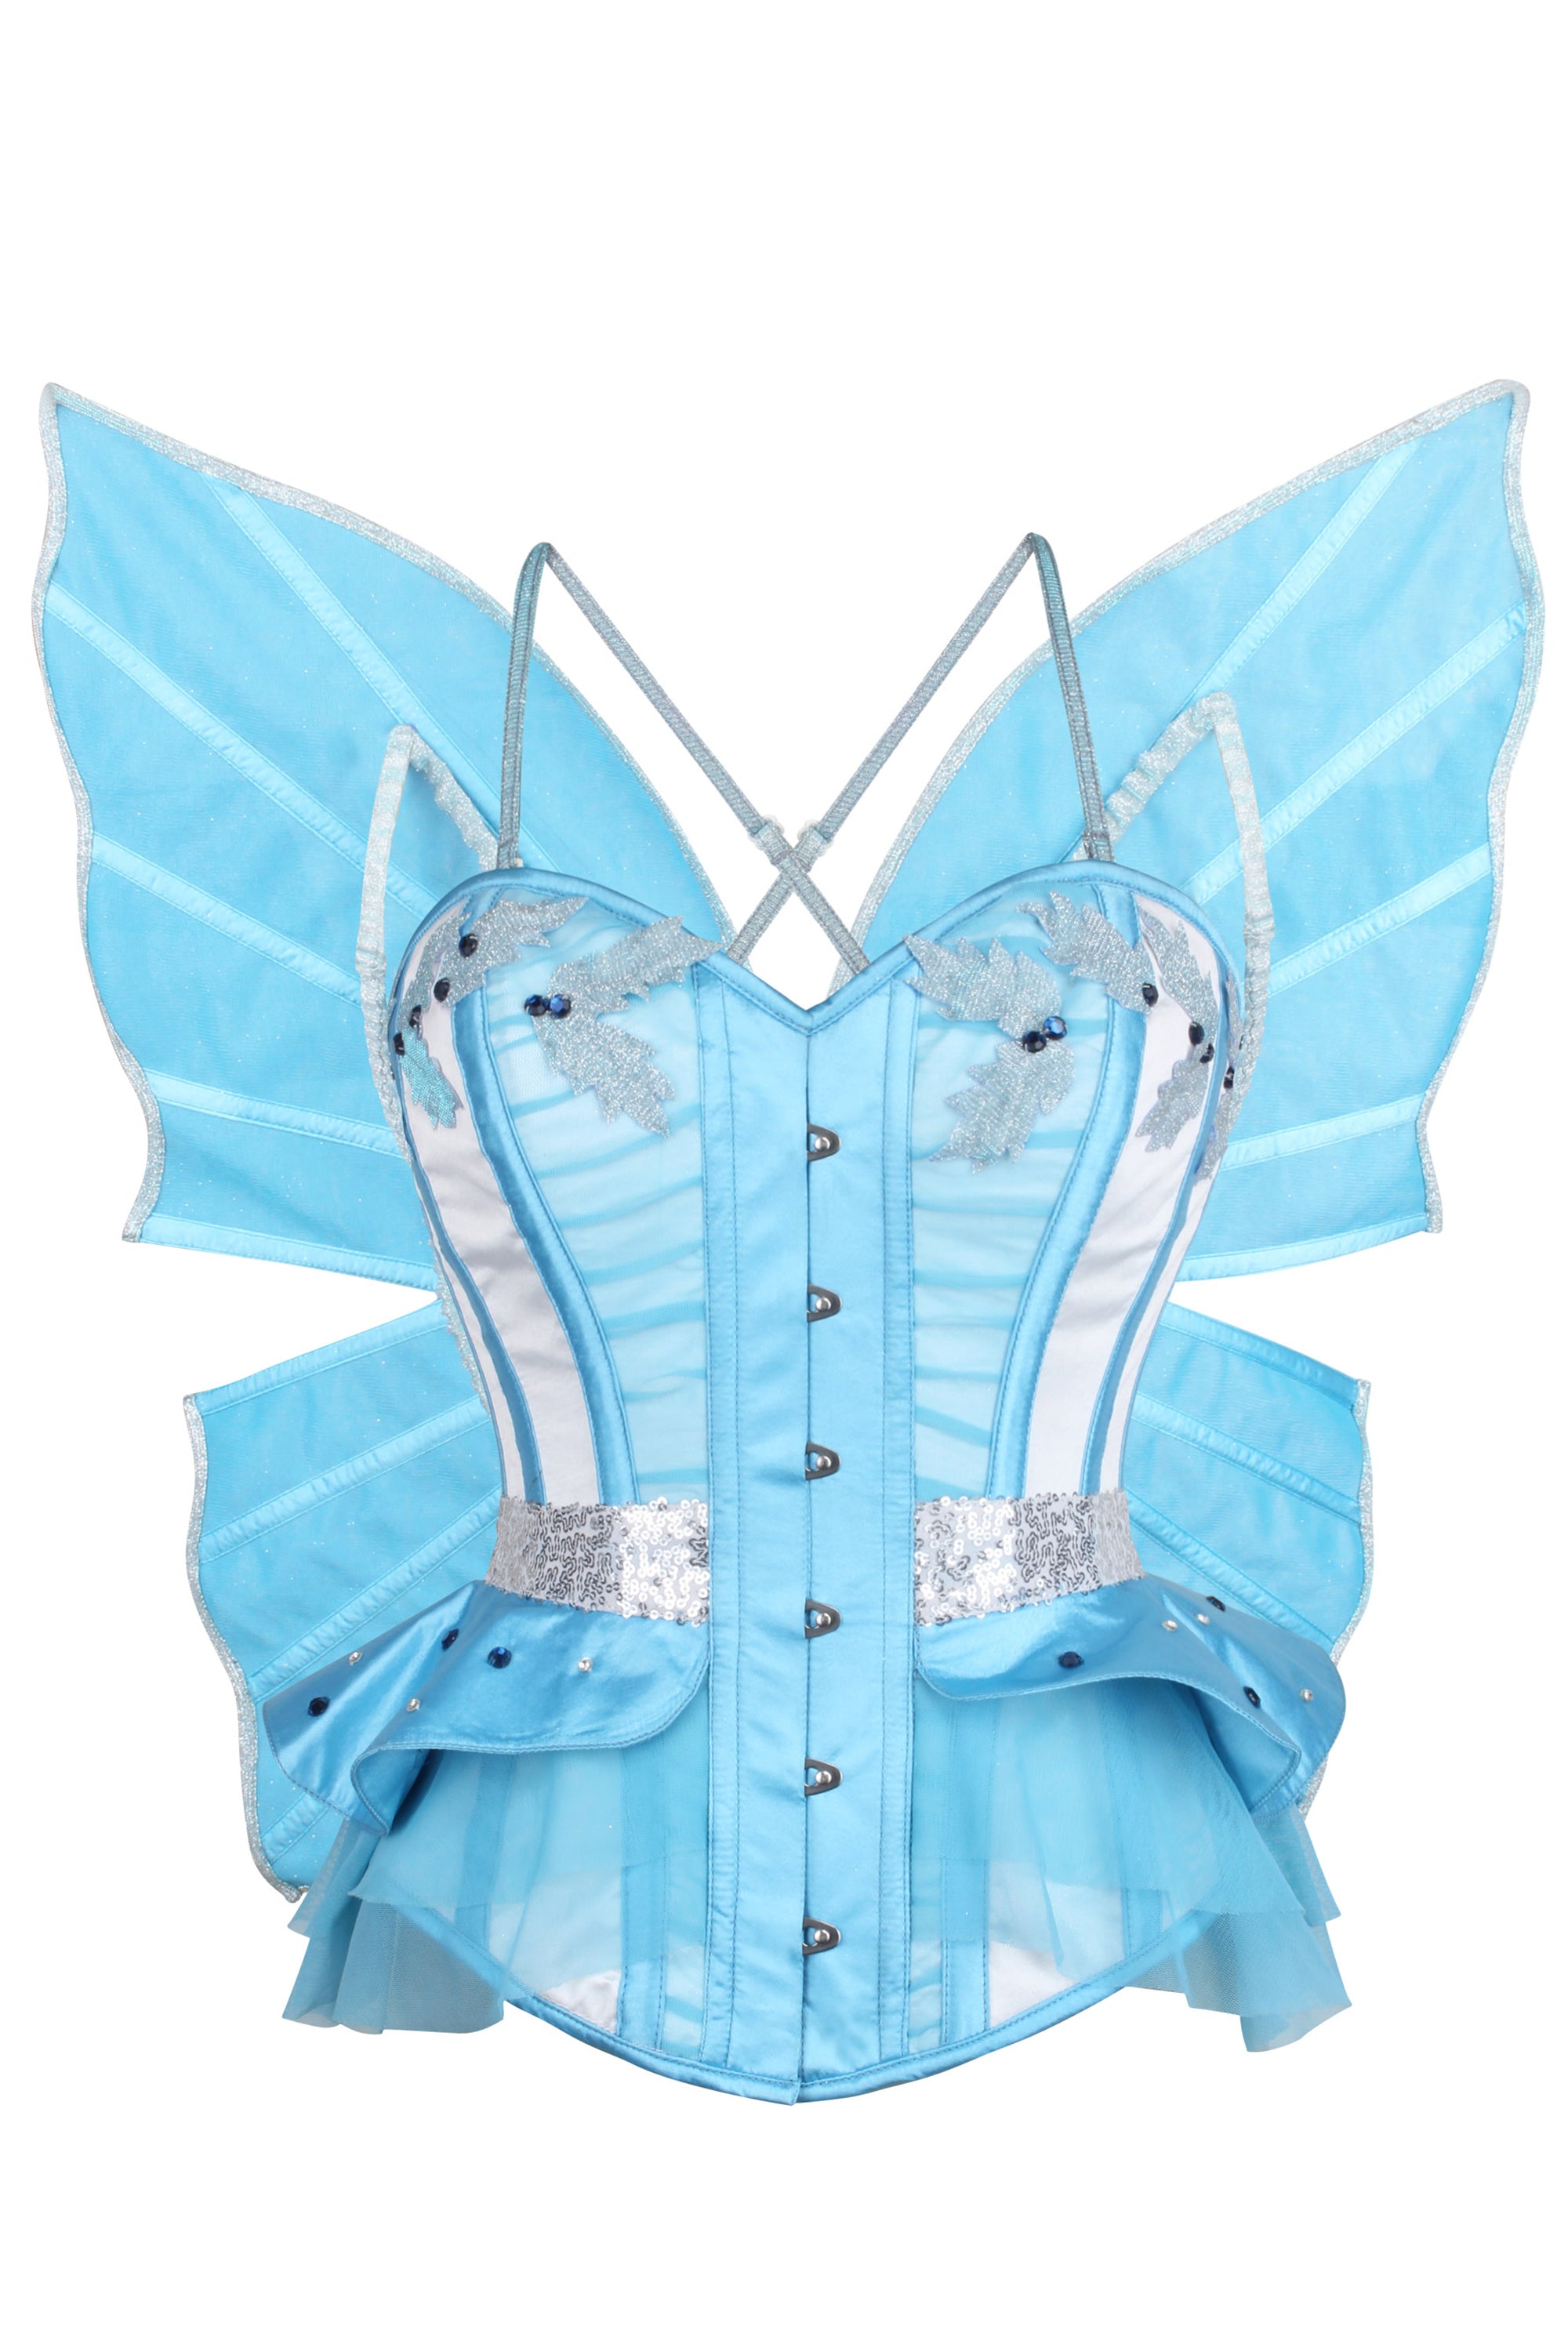 From Apple to Hour Glass: A Corset Review – G+Dazzle